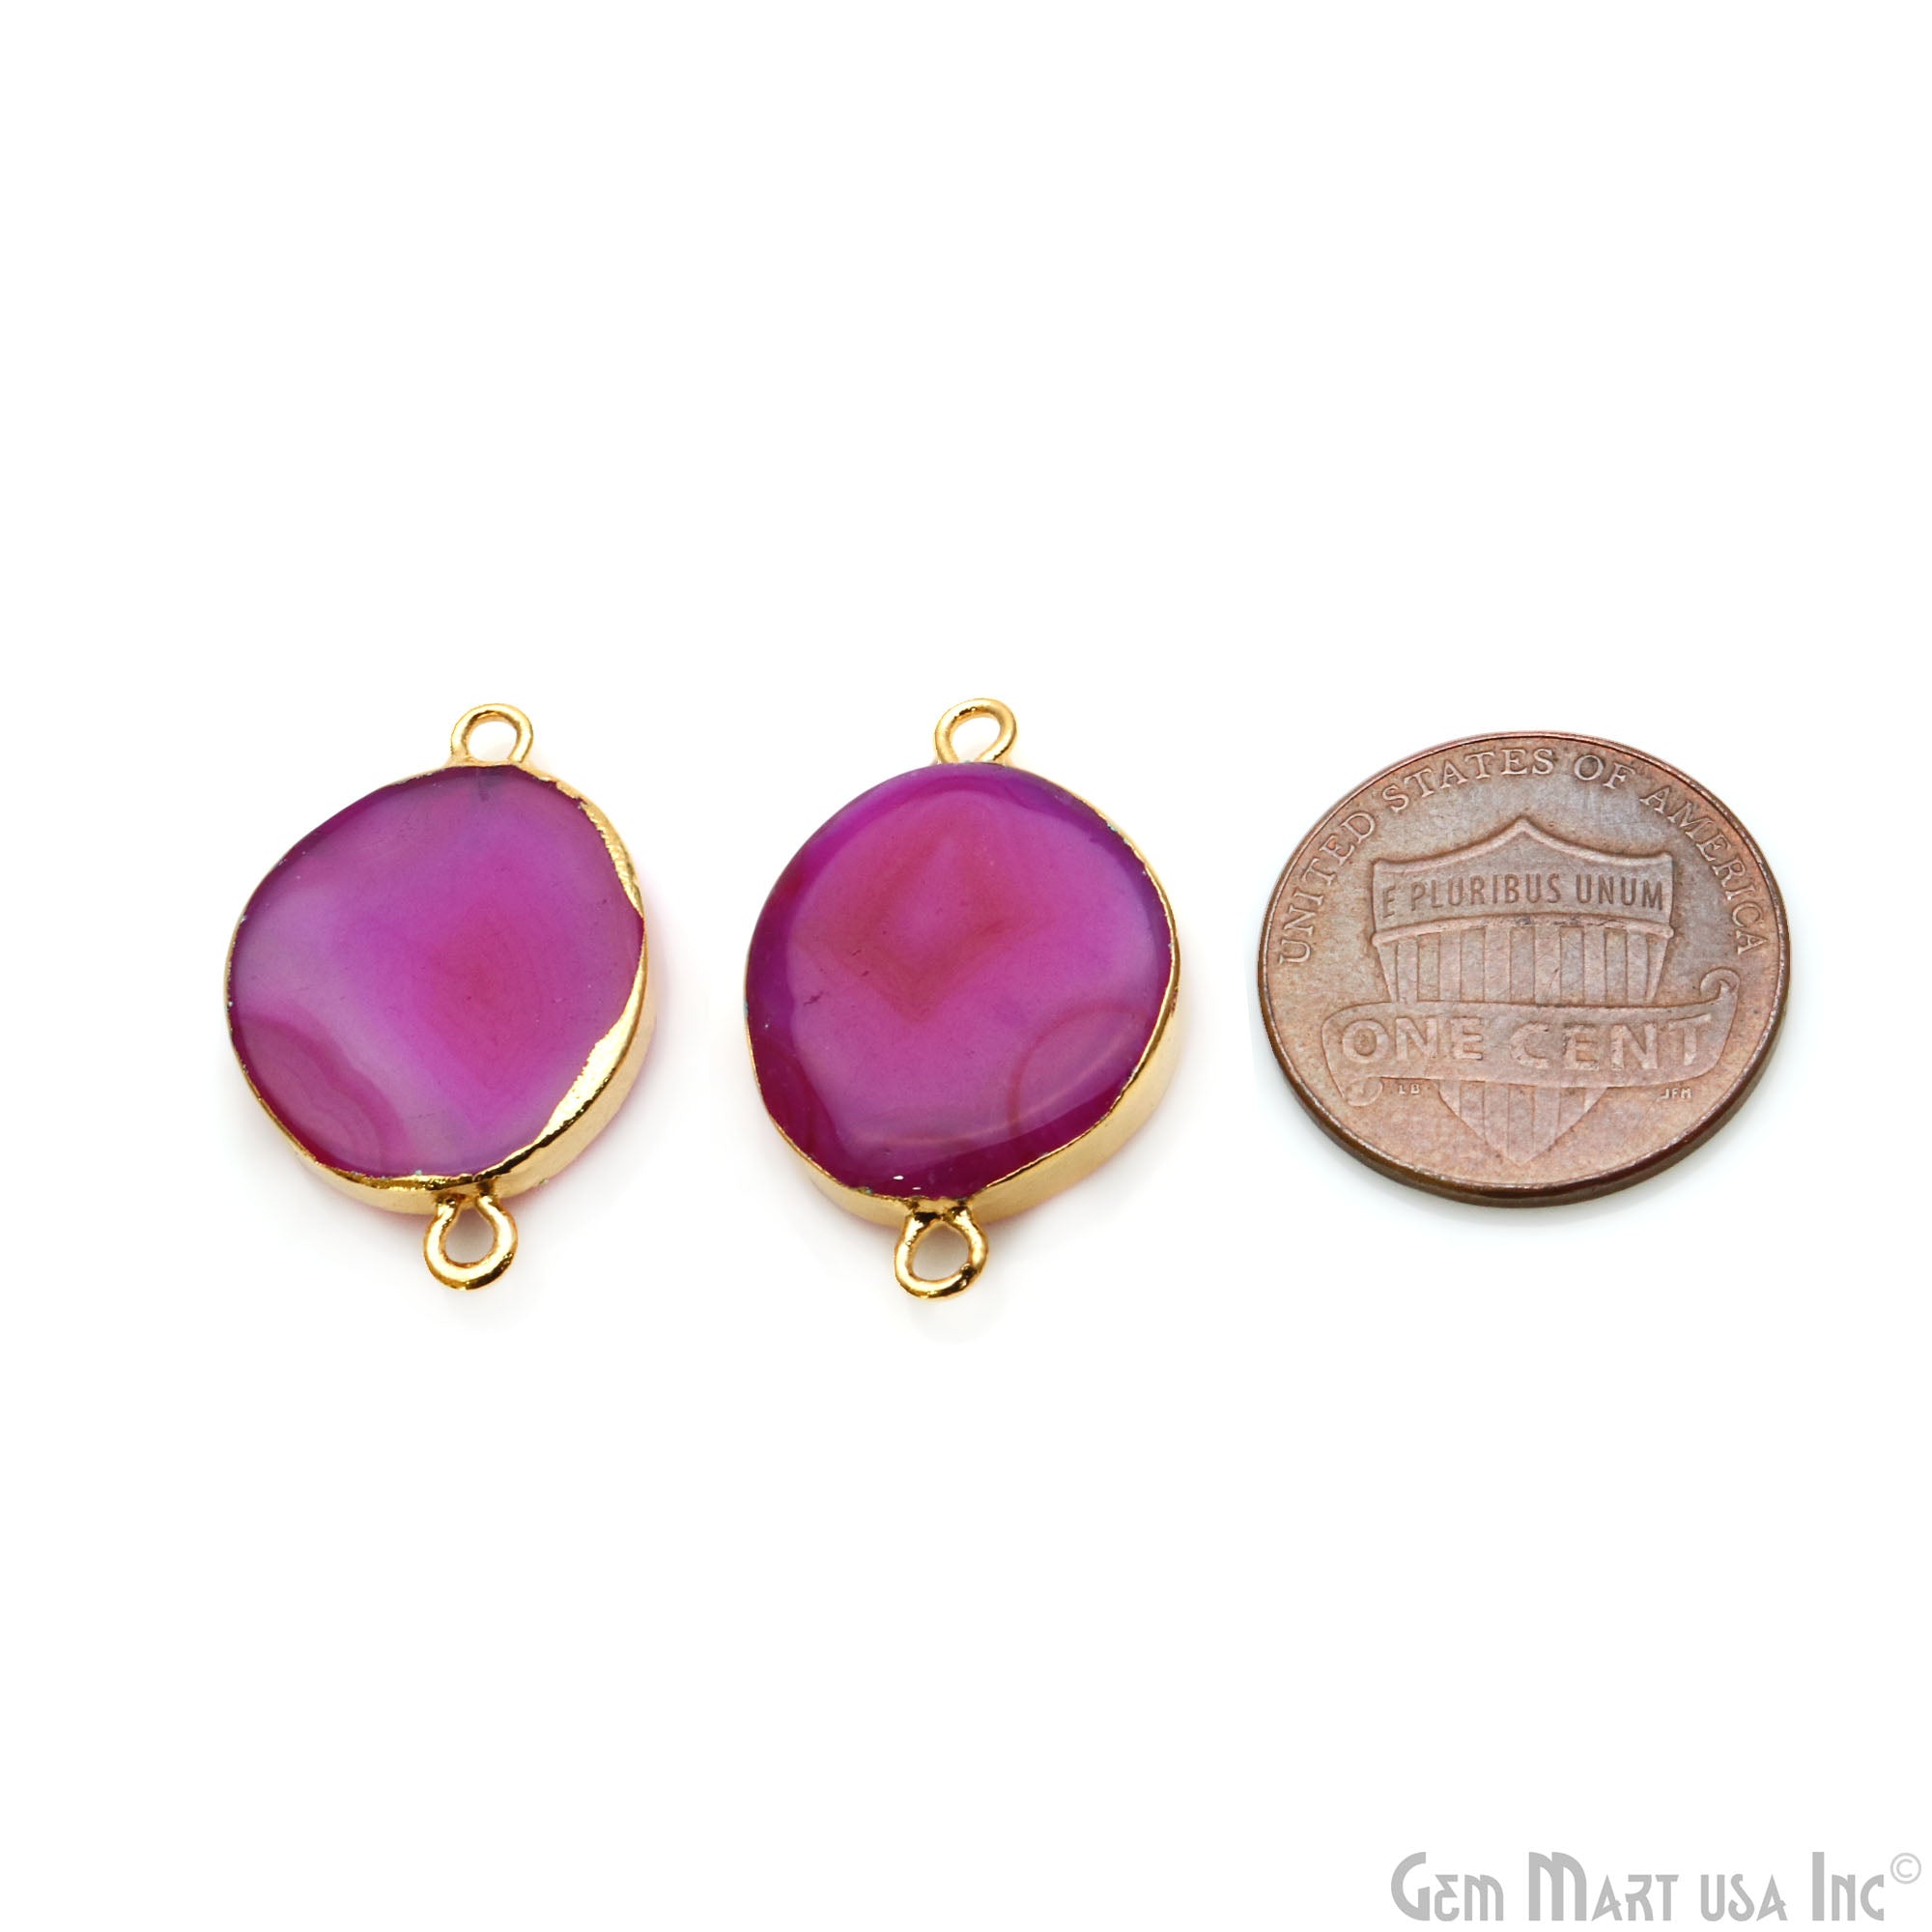 Agate Slice 23x15mm Organic Gold Electroplated Gemstone Earring Connector 1 Pair